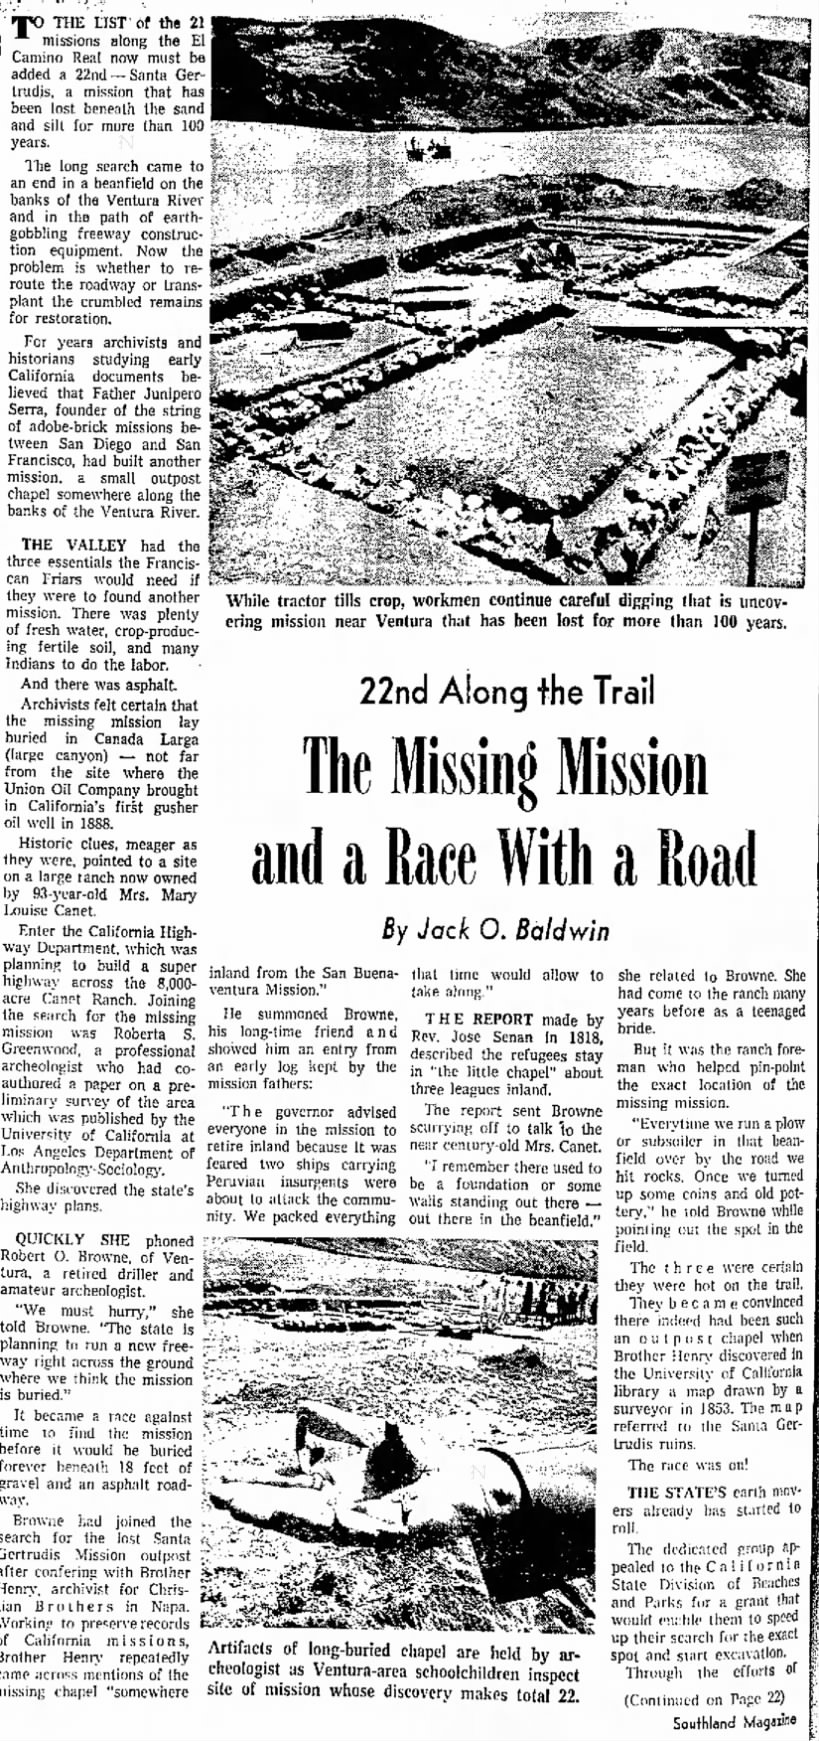 The Missing Mission and a Race With a Road